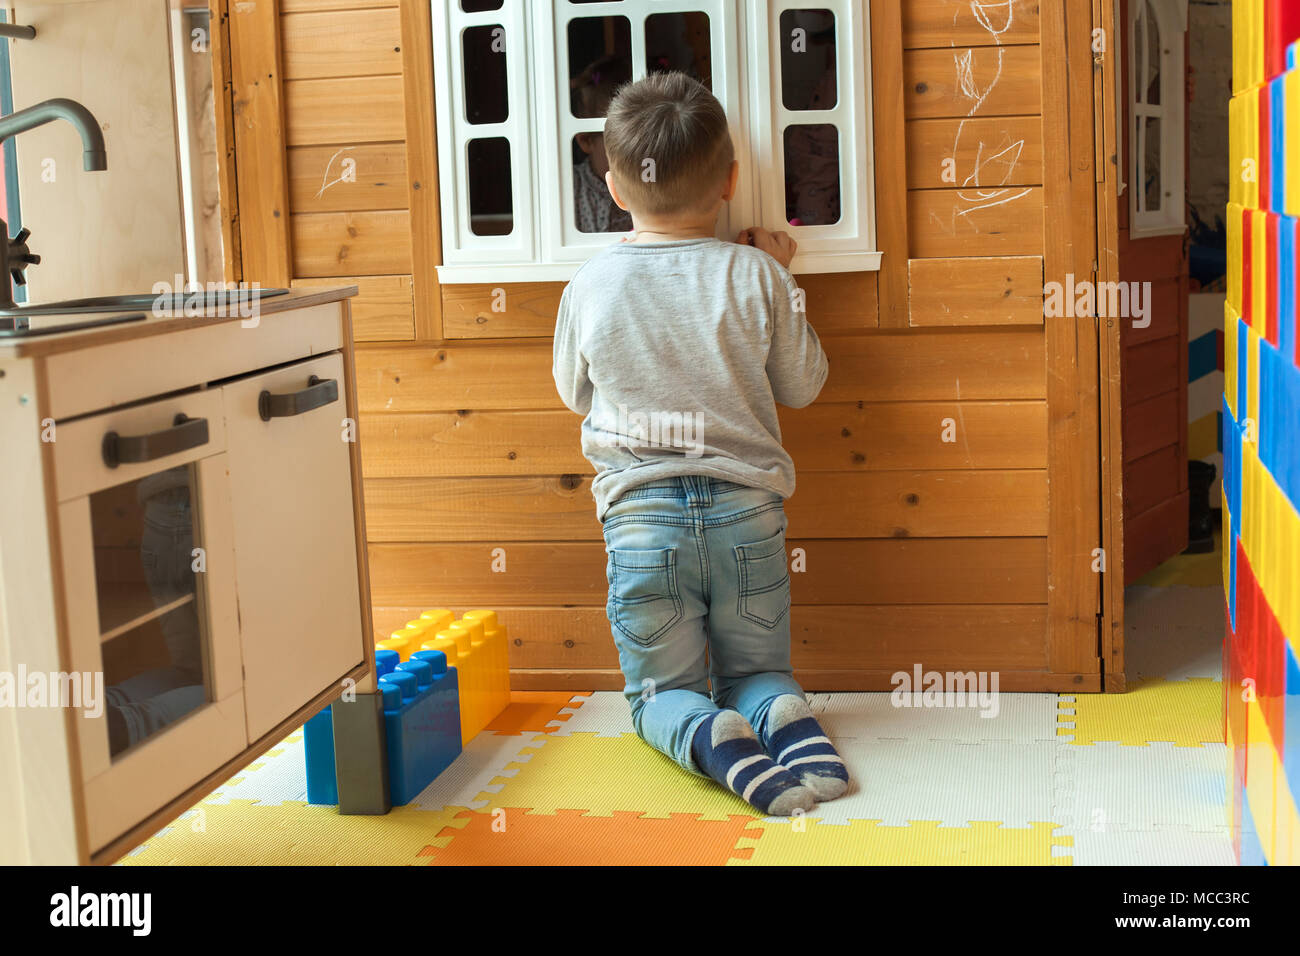 the boy is 4 years old, the blond plays on the playground indoors, peeps out the window of the toy wooden house Stock Photo